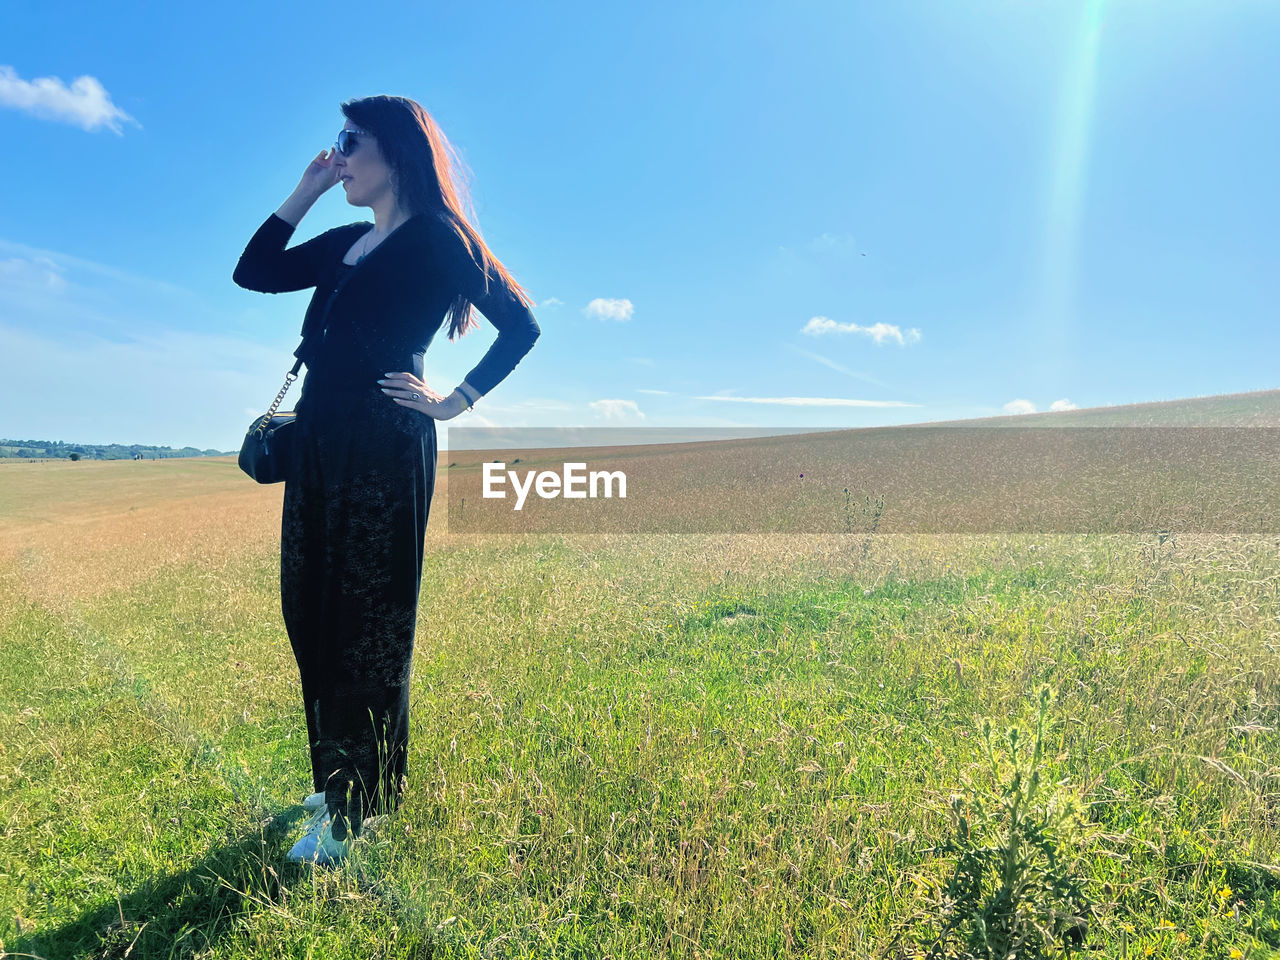 one person, sky, adult, nature, grass, landscape, field, women, land, environment, plant, meadow, standing, grassland, sunlight, beauty in nature, rural scene, young adult, green, full length, blue, day, plain, scenics - nature, horizon, natural environment, female, horizon over land, person, outdoors, tranquility, lifestyles, clothing, cloud, leisure activity, tranquil scene, solitude, copy space, long hair, non-urban scene, sunny, fashion, hairstyle, summer, looking, emotion